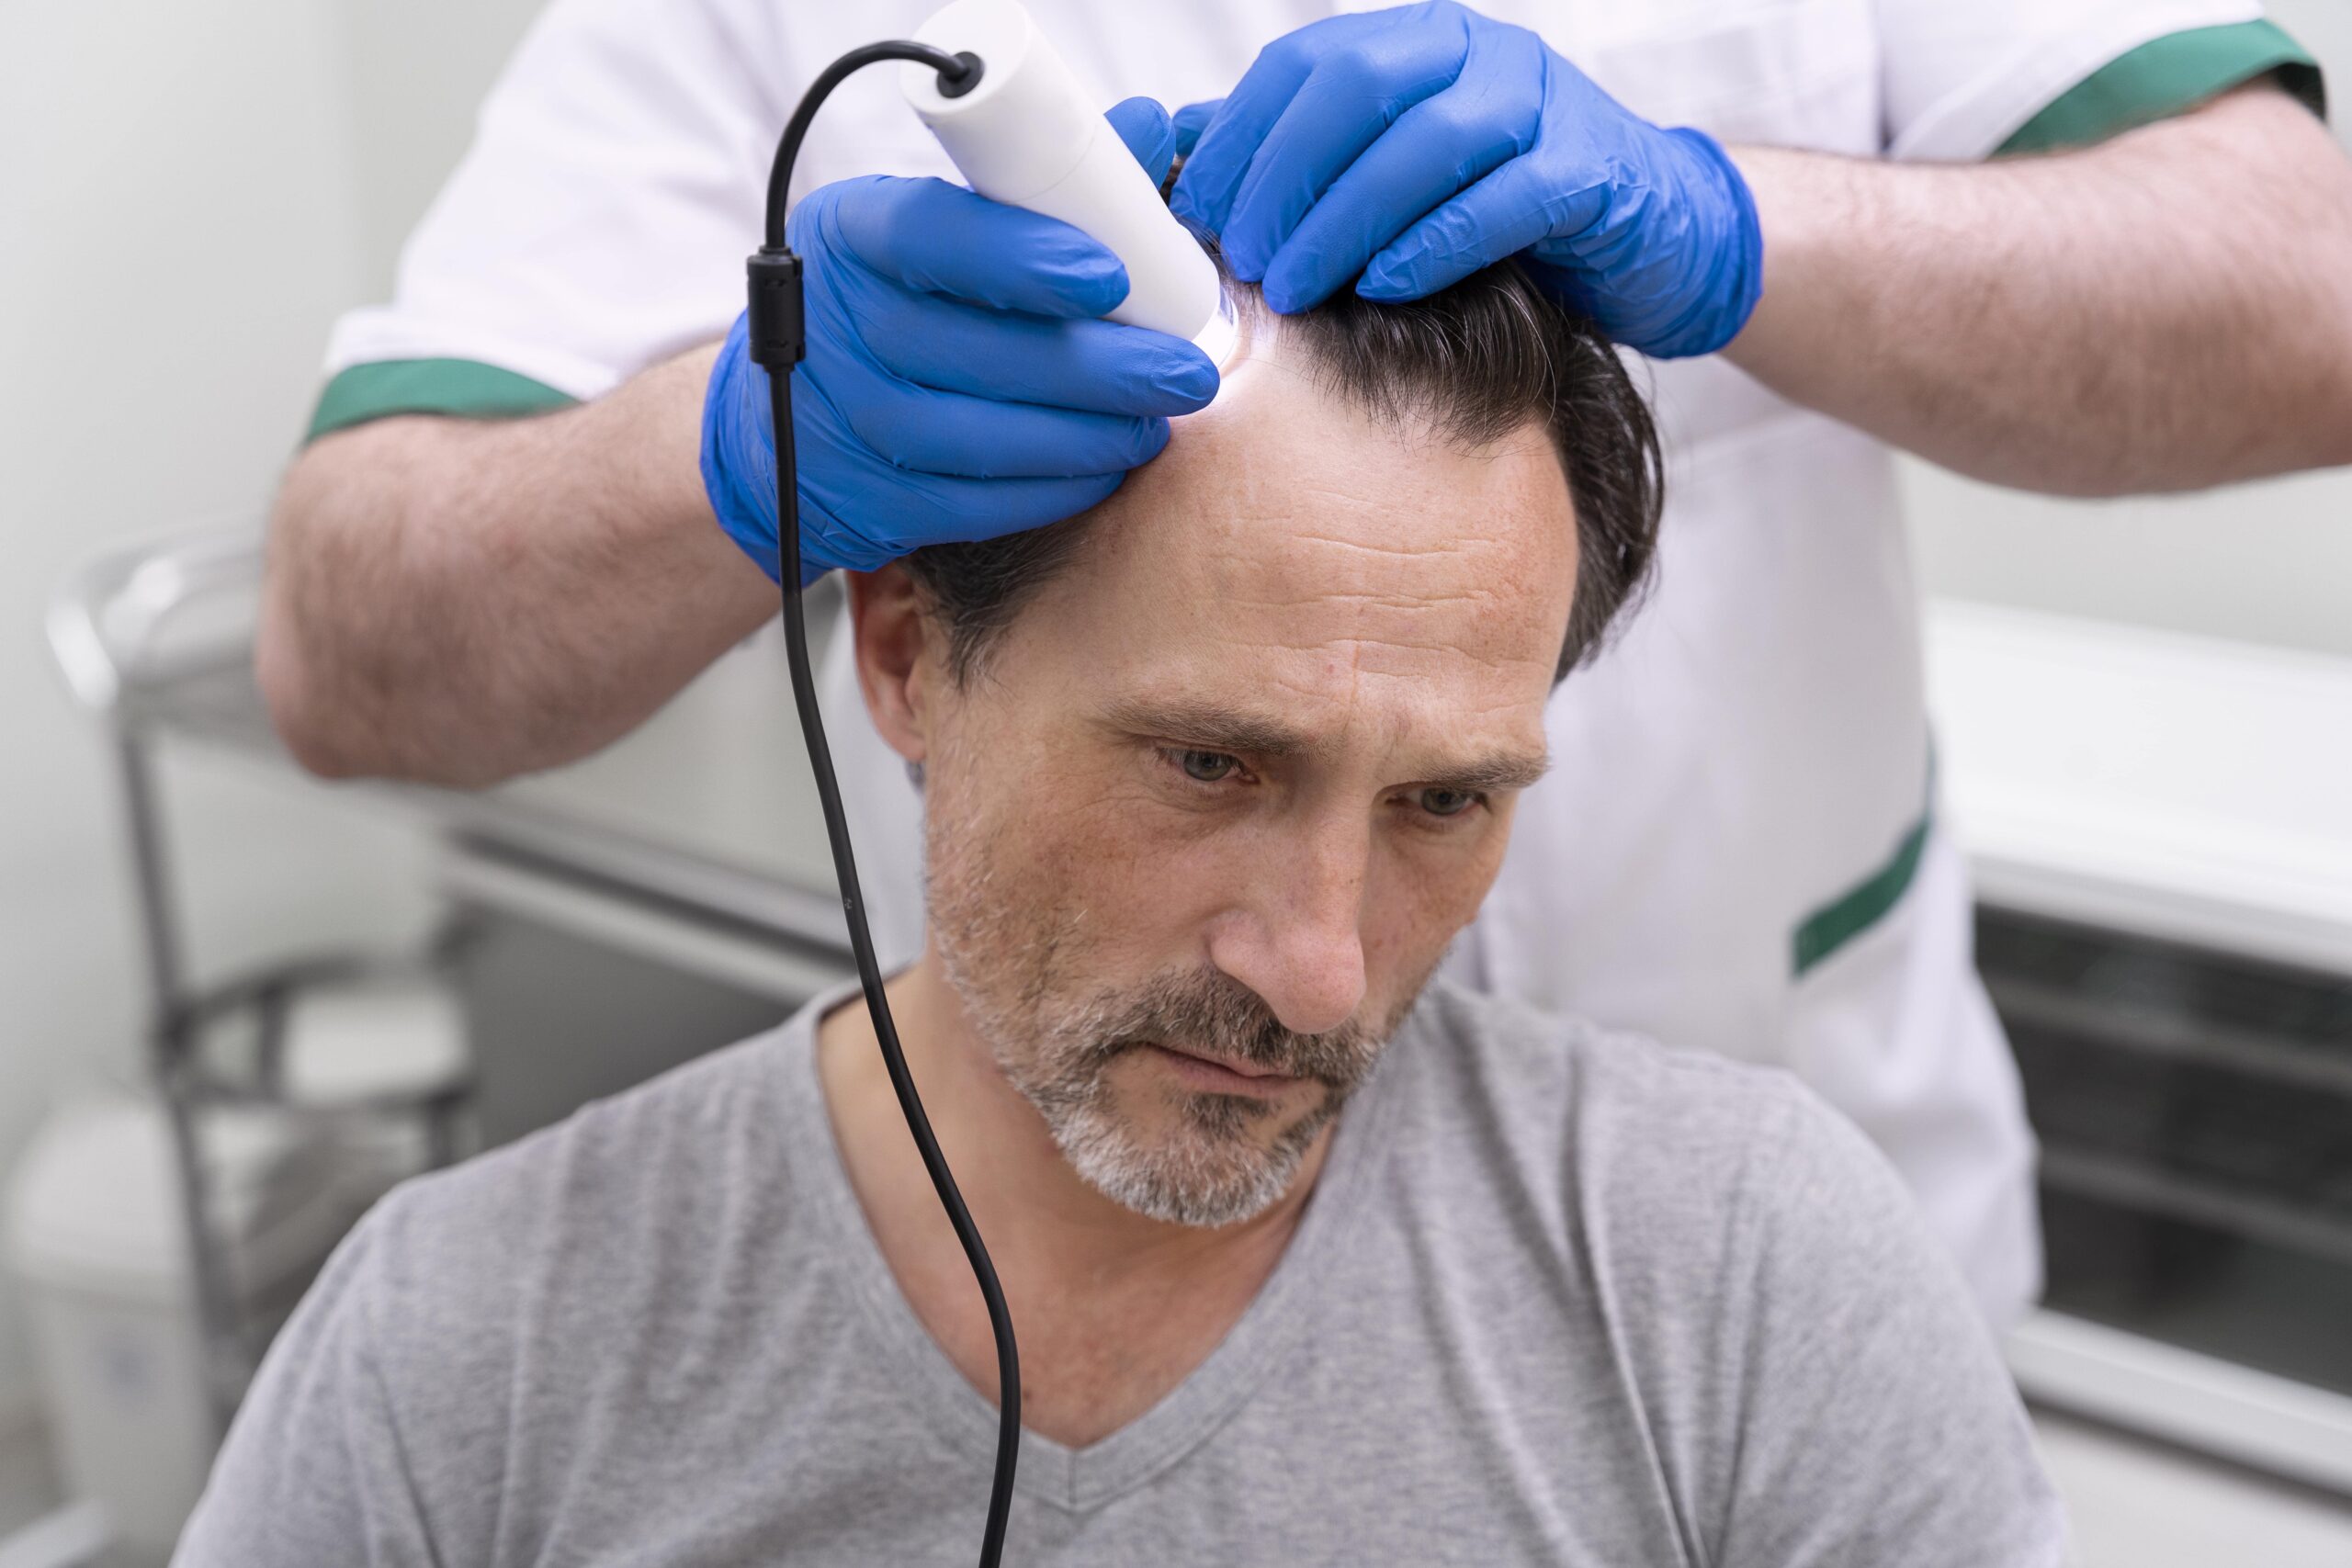 What Is FUE Hair Transplant? How is FUE Hair Transplant Applied?